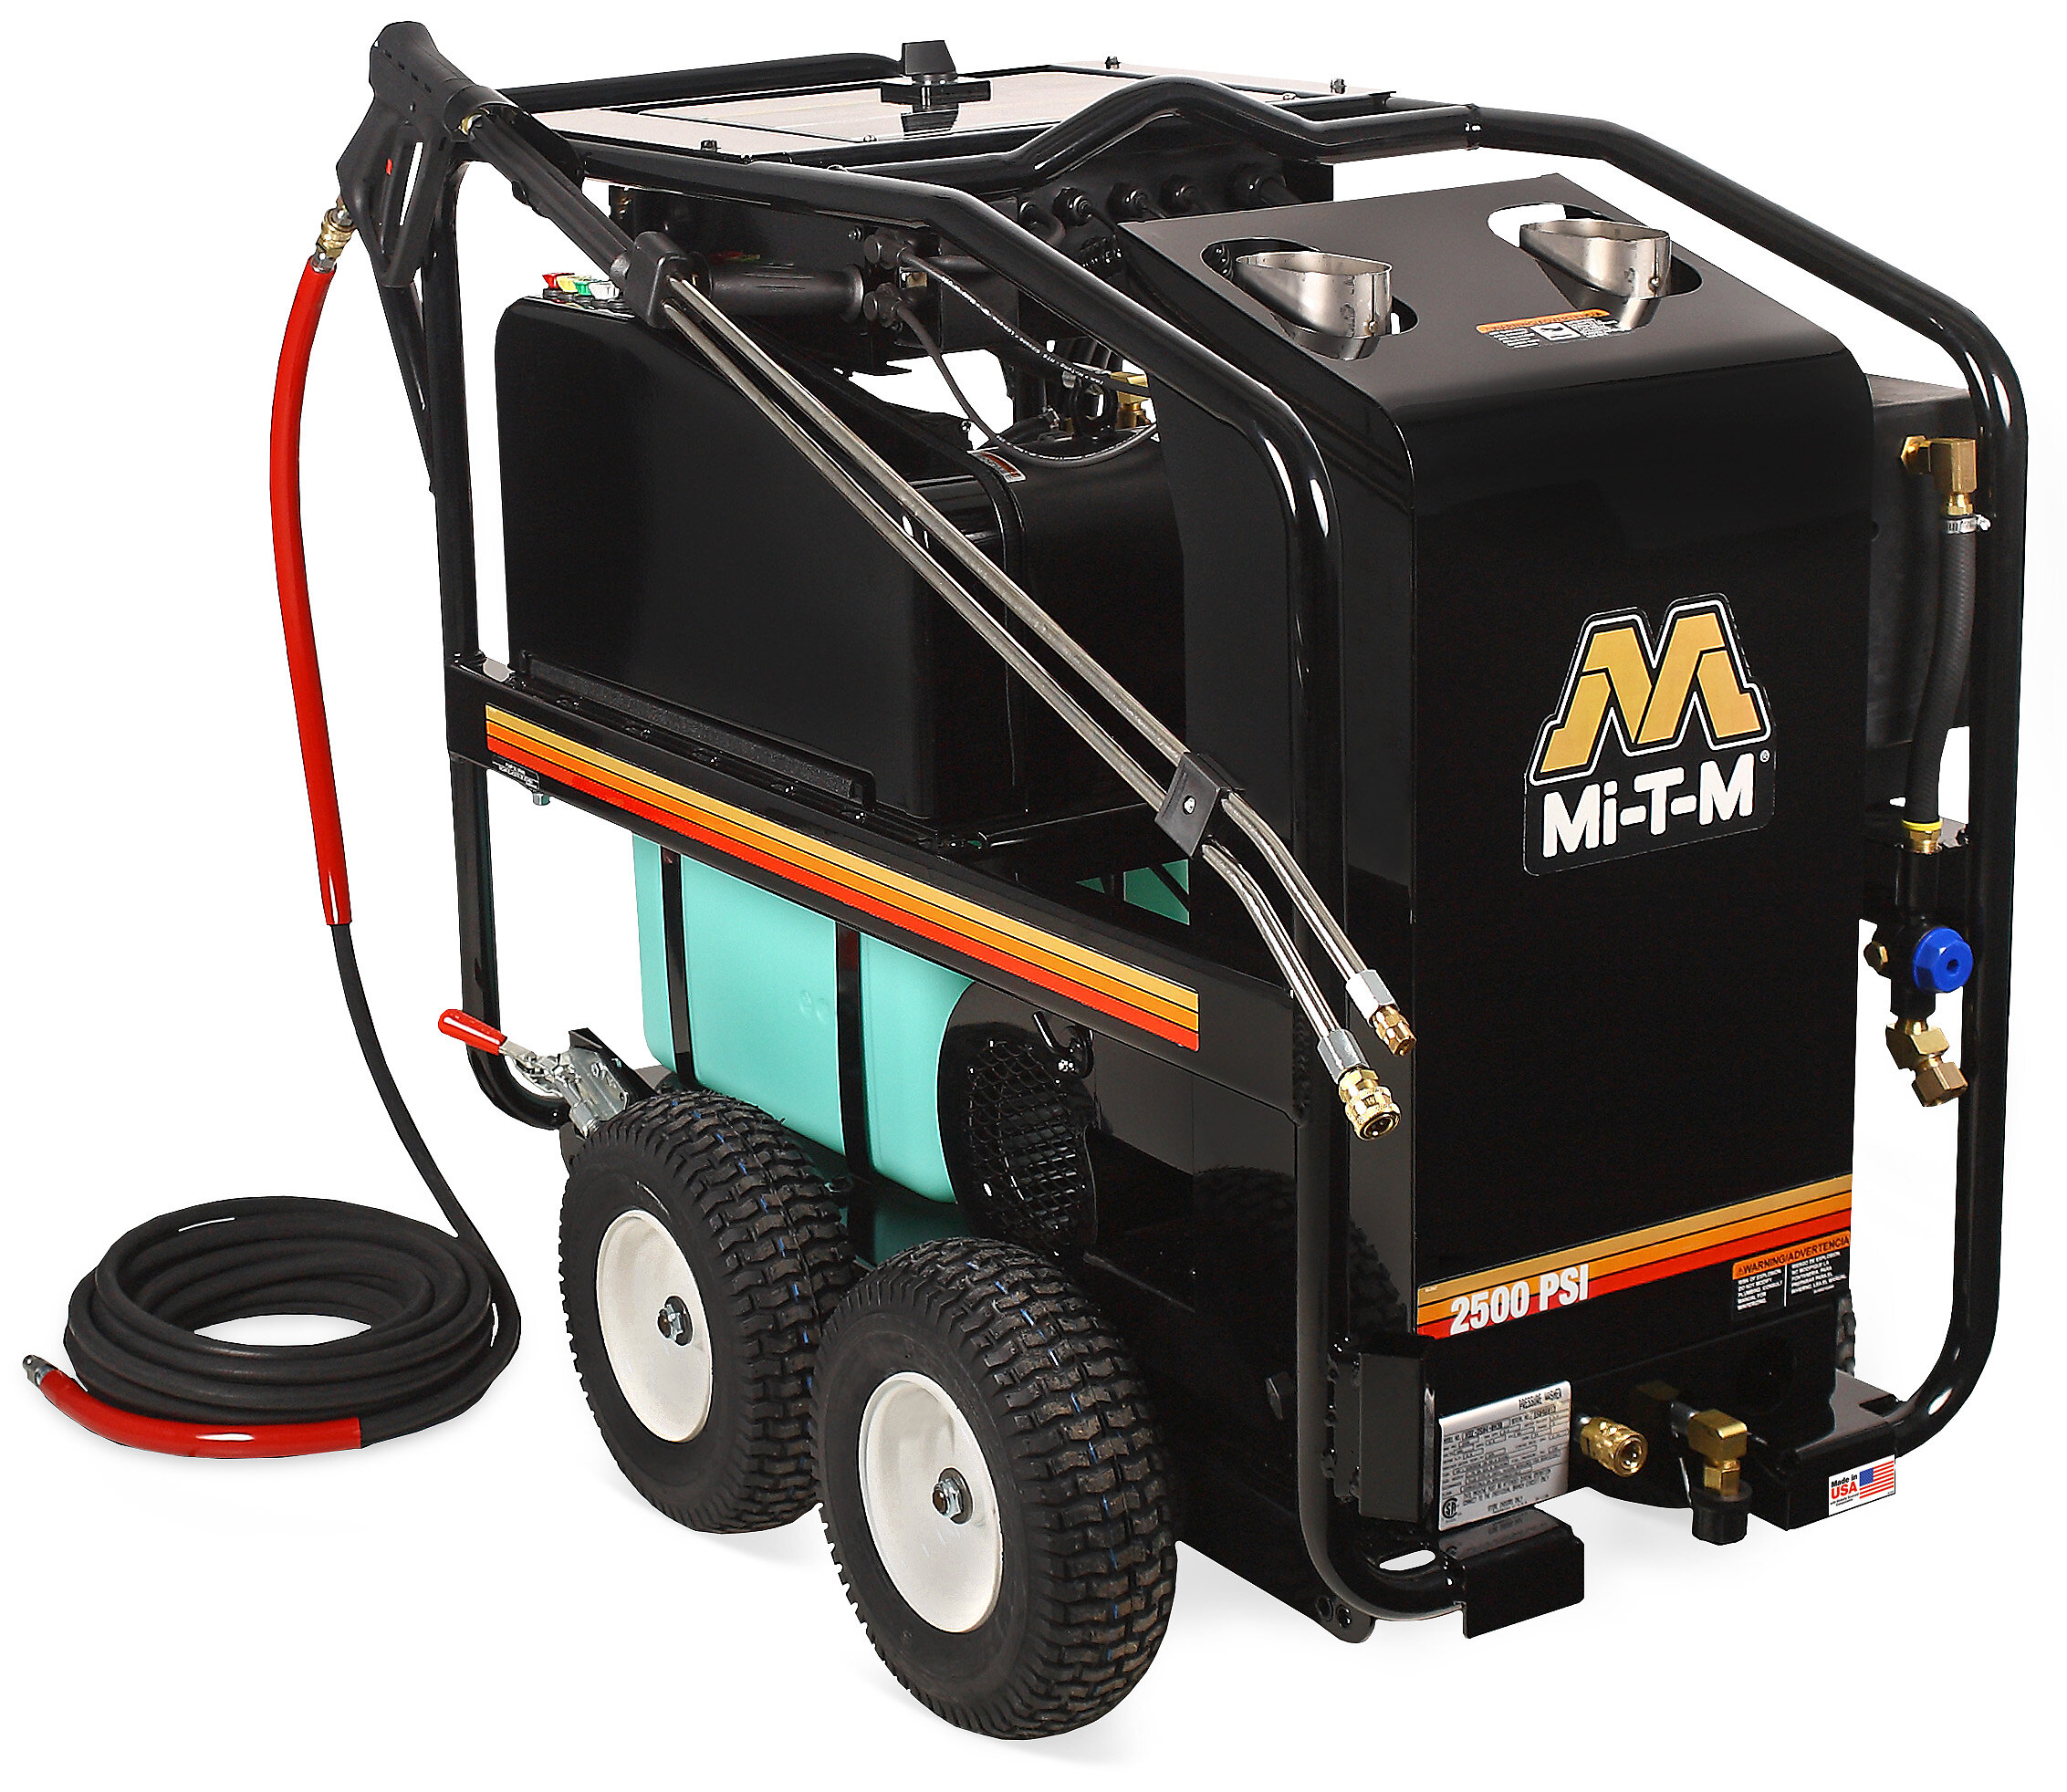 Benefits of Hot & Cold Pressure Washers - Spartan Manufacturing Corporation